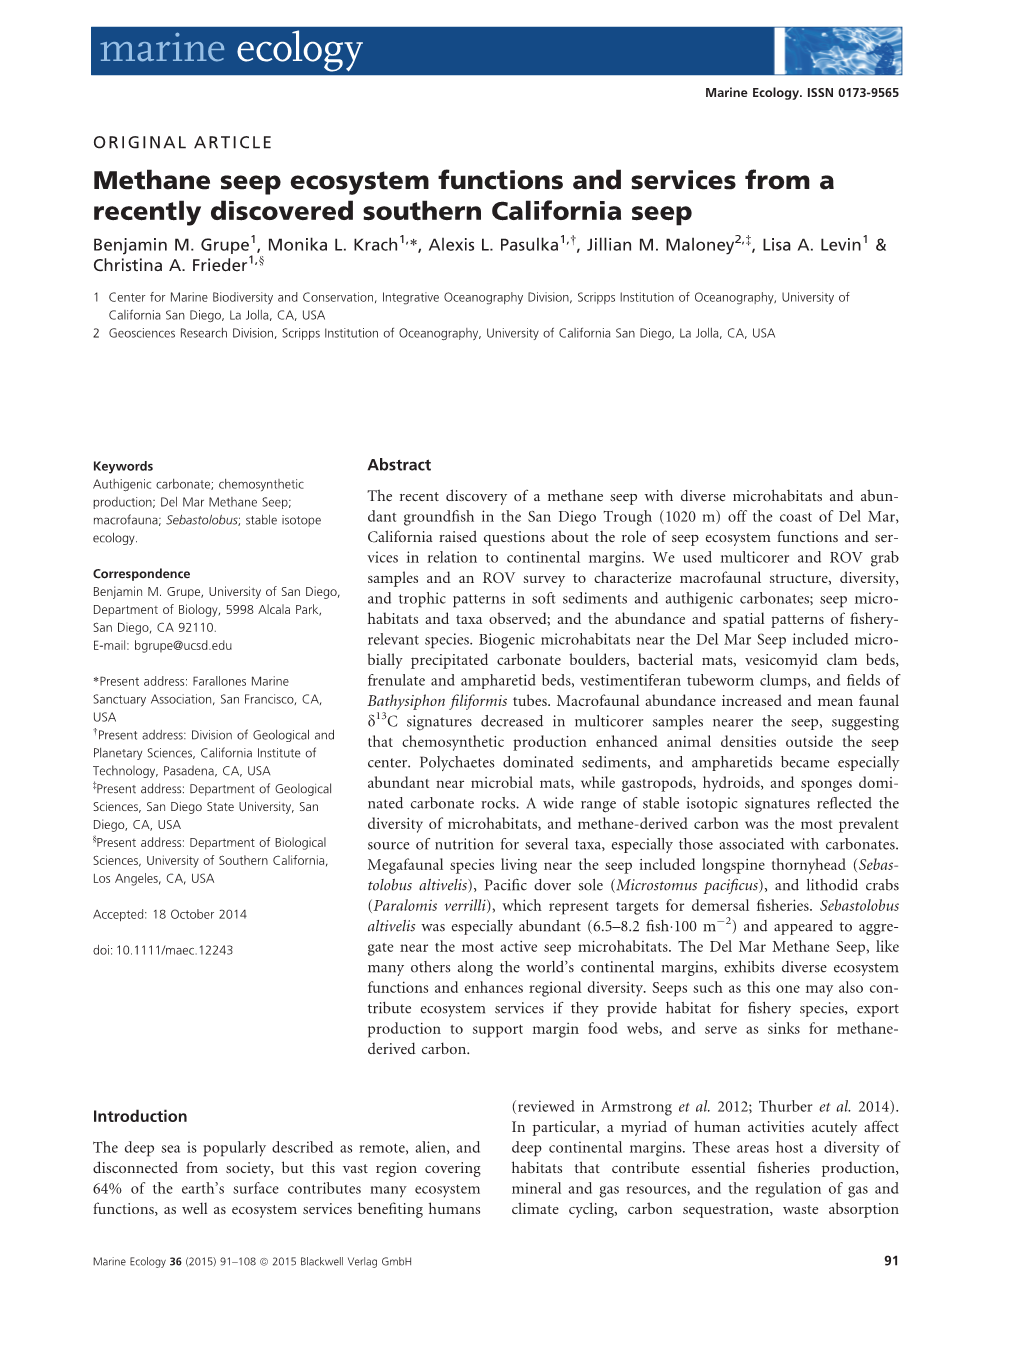 Methane Seep Ecosystem Functions and Services from a Recently Discovered Southern California Seep Benjamin M